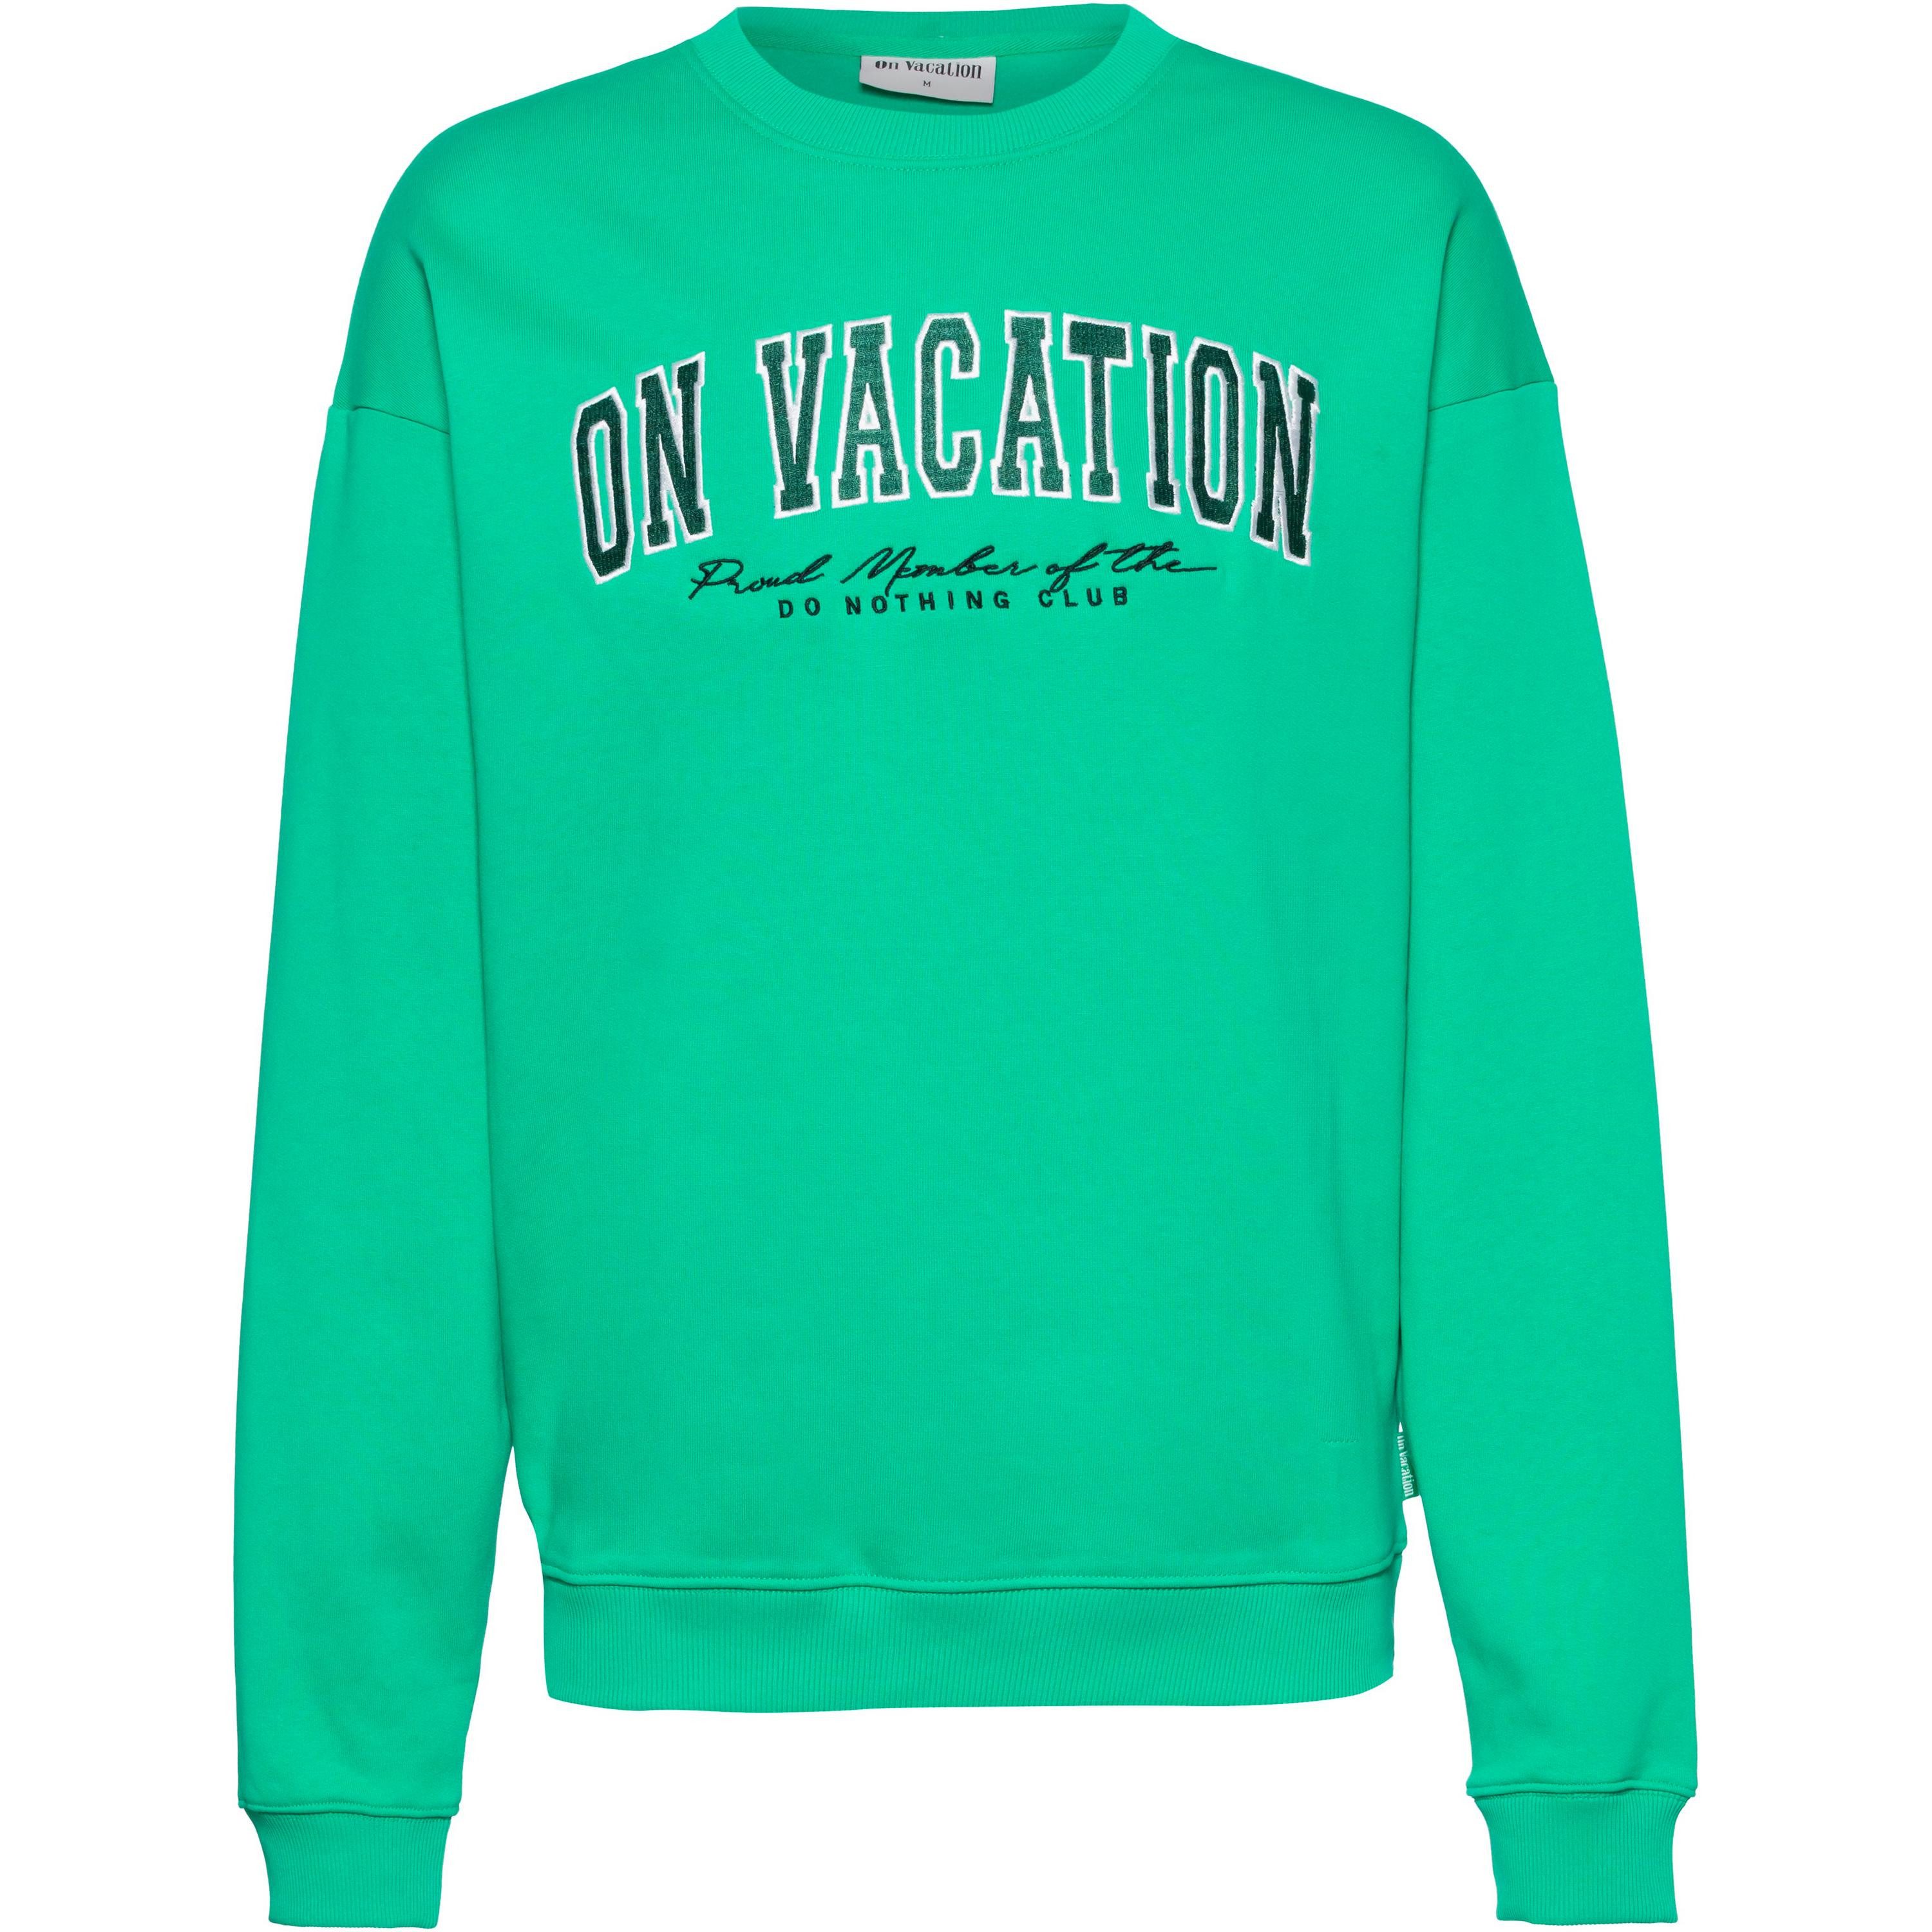 On Vacation Club Sweater College